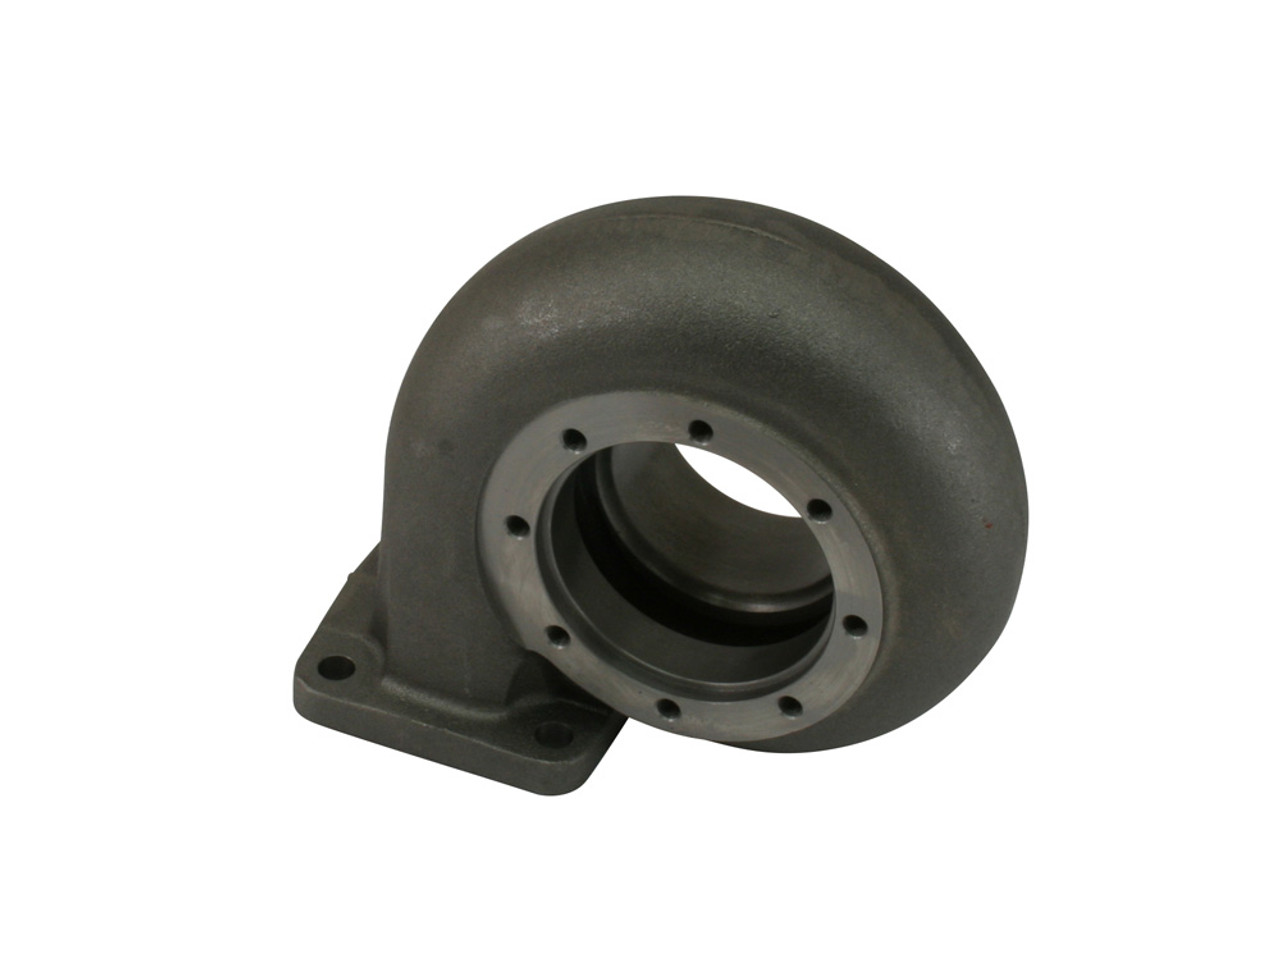 T4 Inlet 3.625" V Band Outlet Turbine Housing